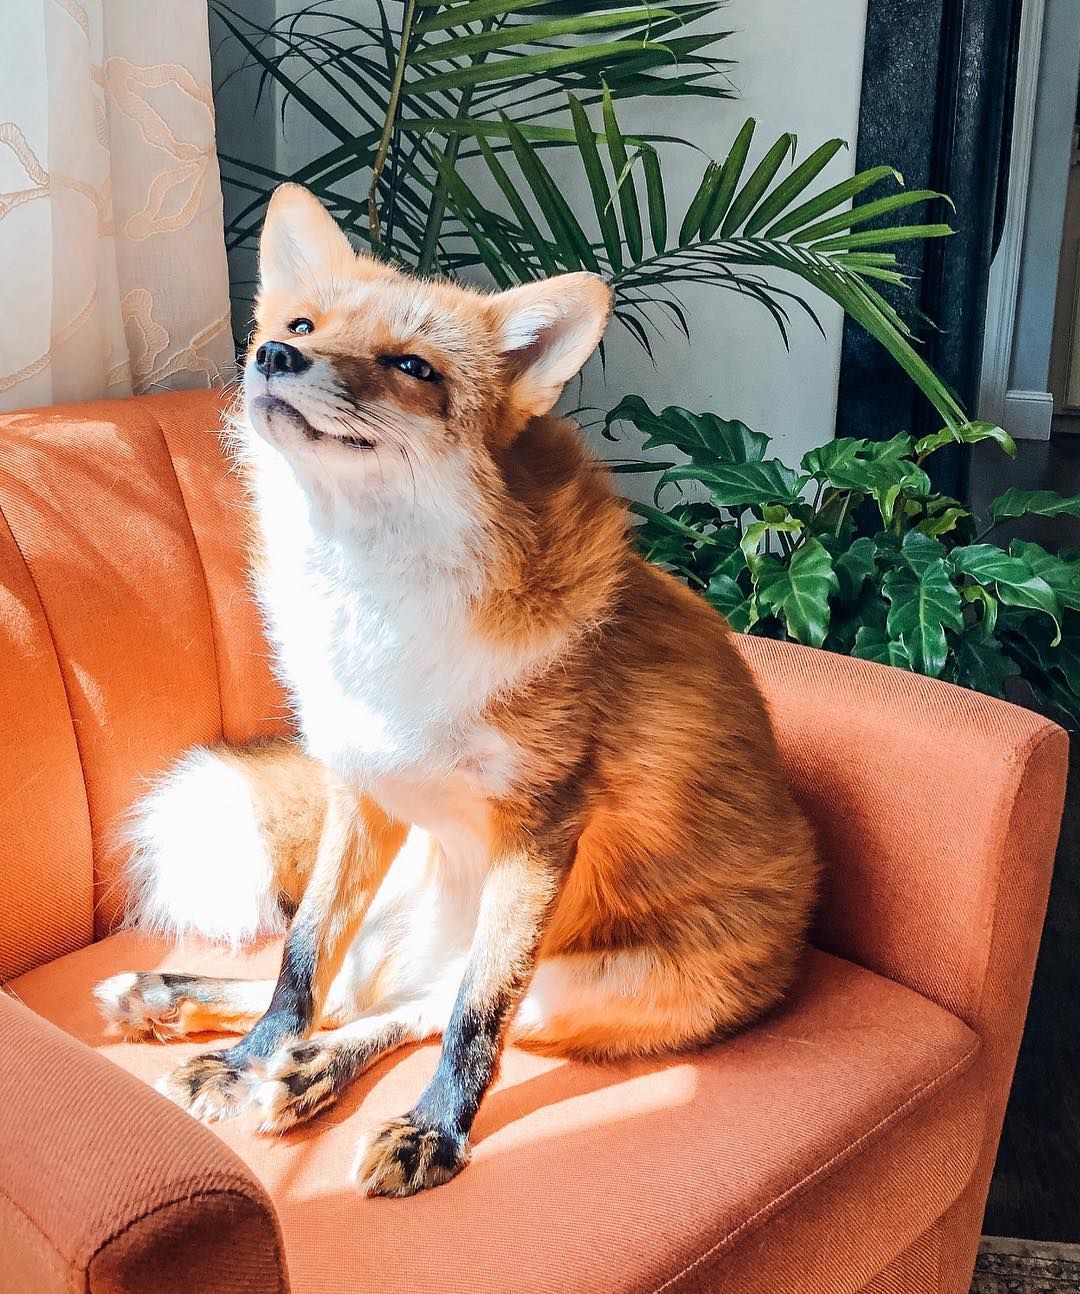 Animal Instagram Accounts You Have To Follow Cute Photos